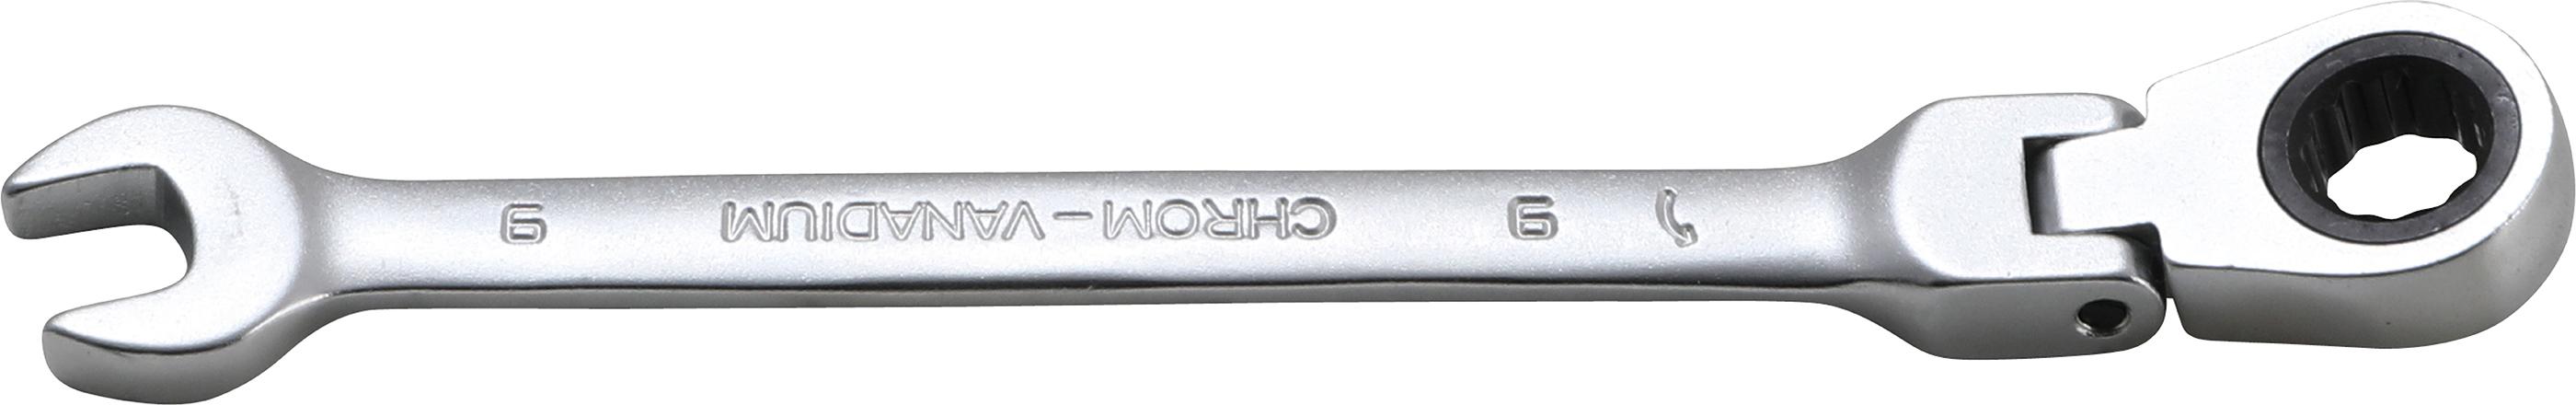 Ratchet Combination Wrench | adjustable | 9 mm (6709)